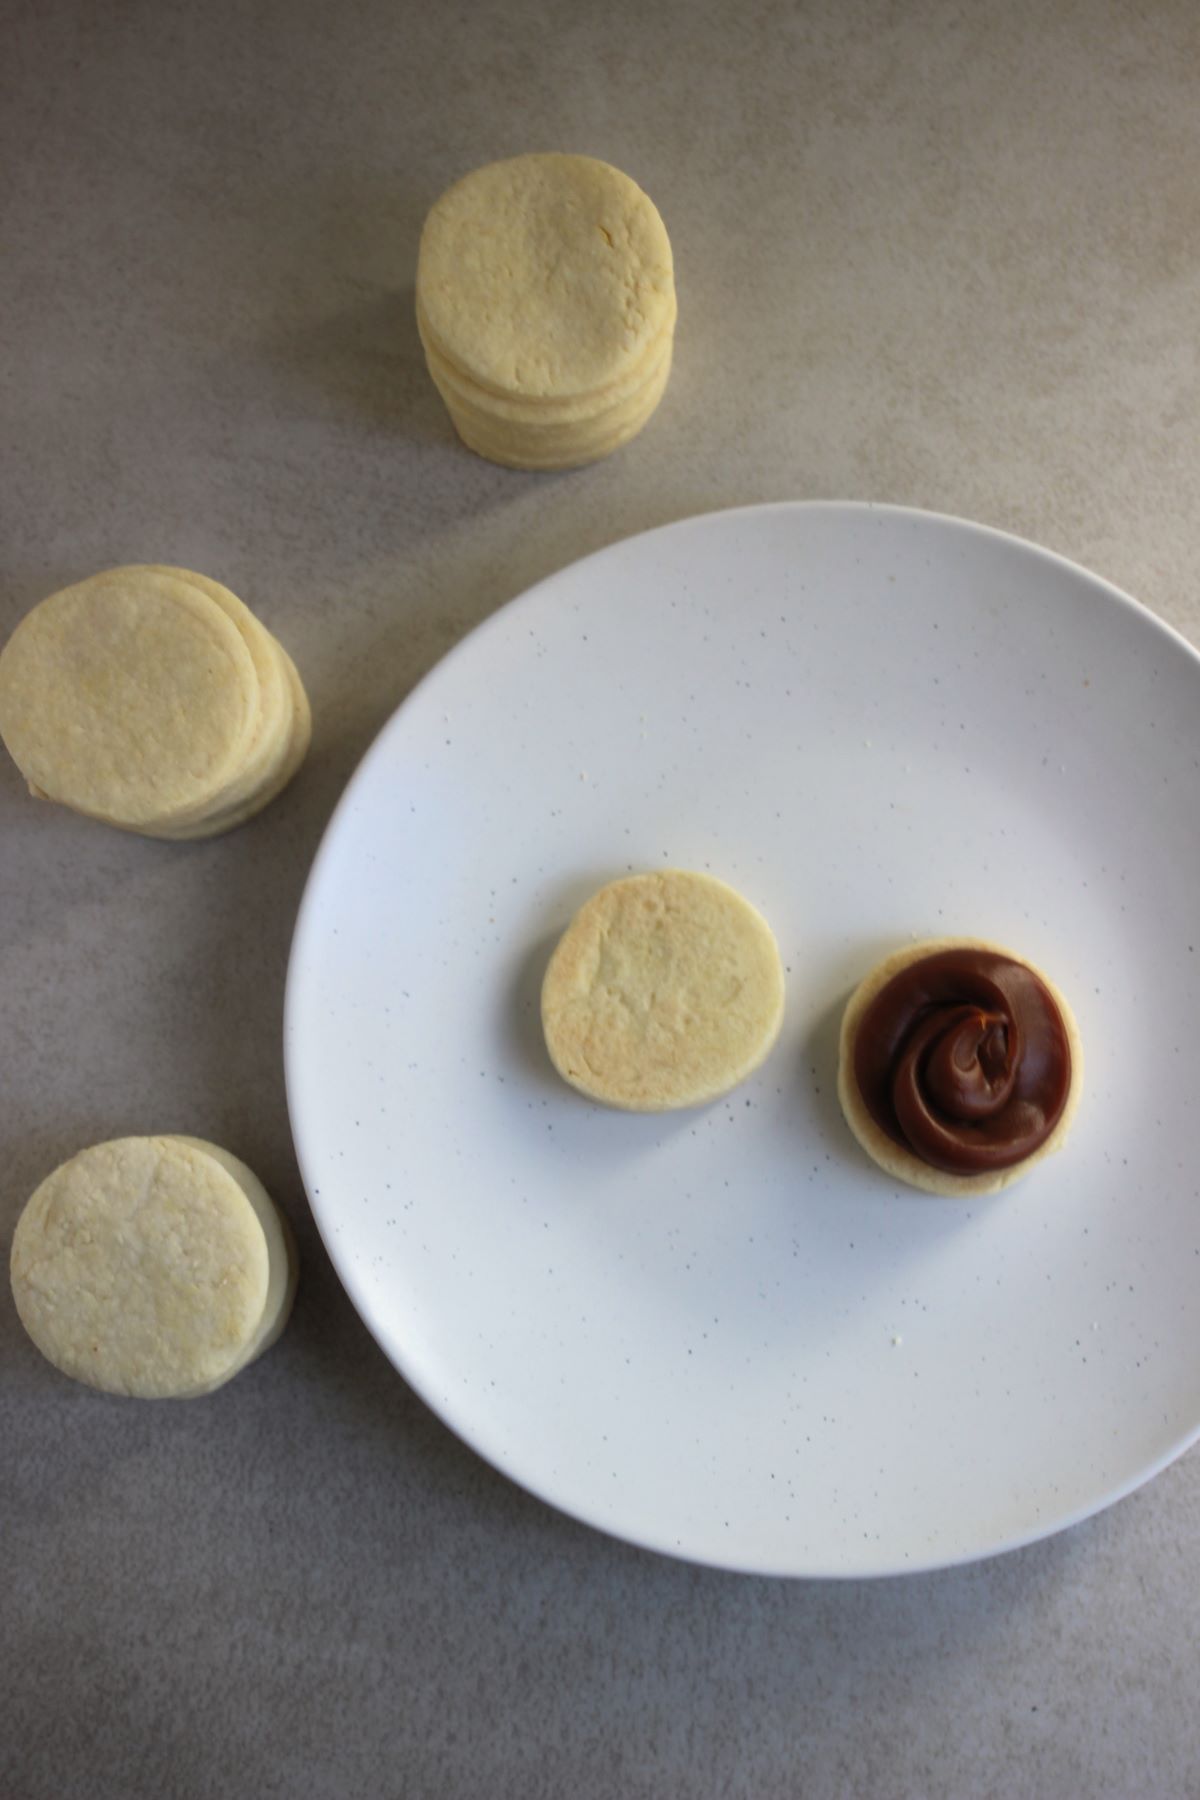 Two circles of alfajor dough, one with dulce de leche, on a white plate. Many round circles of alfajor dough on the side.